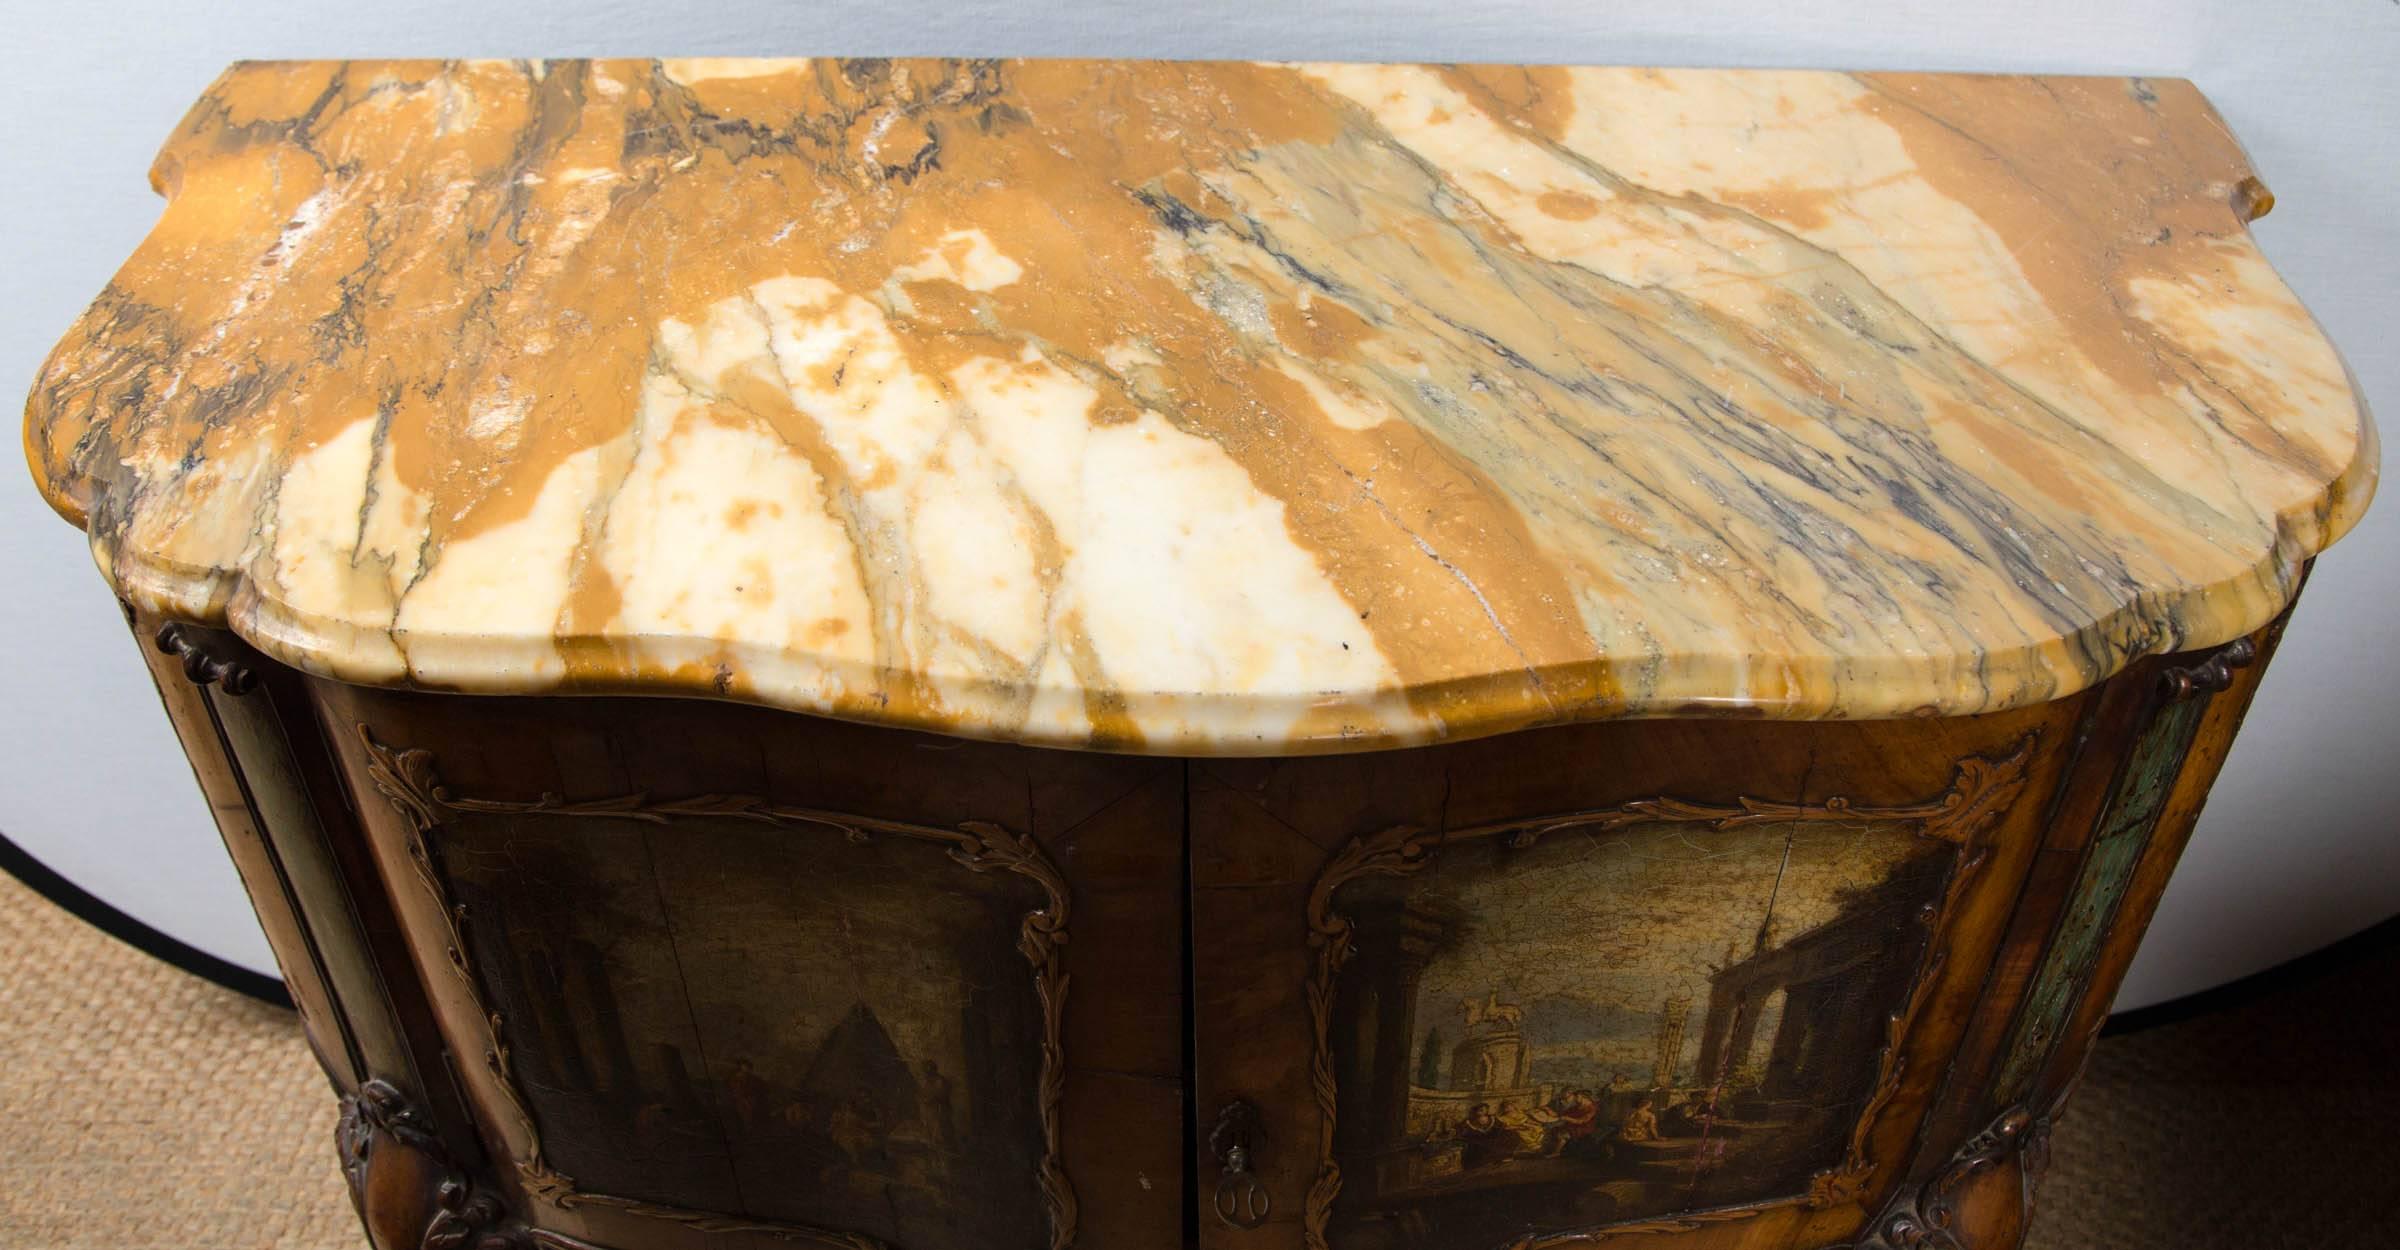 This  commode is painted  with neo-classical scenes, probably inspired  by the engravings of  Panini.  The front is a double door  cabinet  that opens to the entire  interior.  The marble top is inset.  Cabriole legs   ending in scrolled  pad feet.